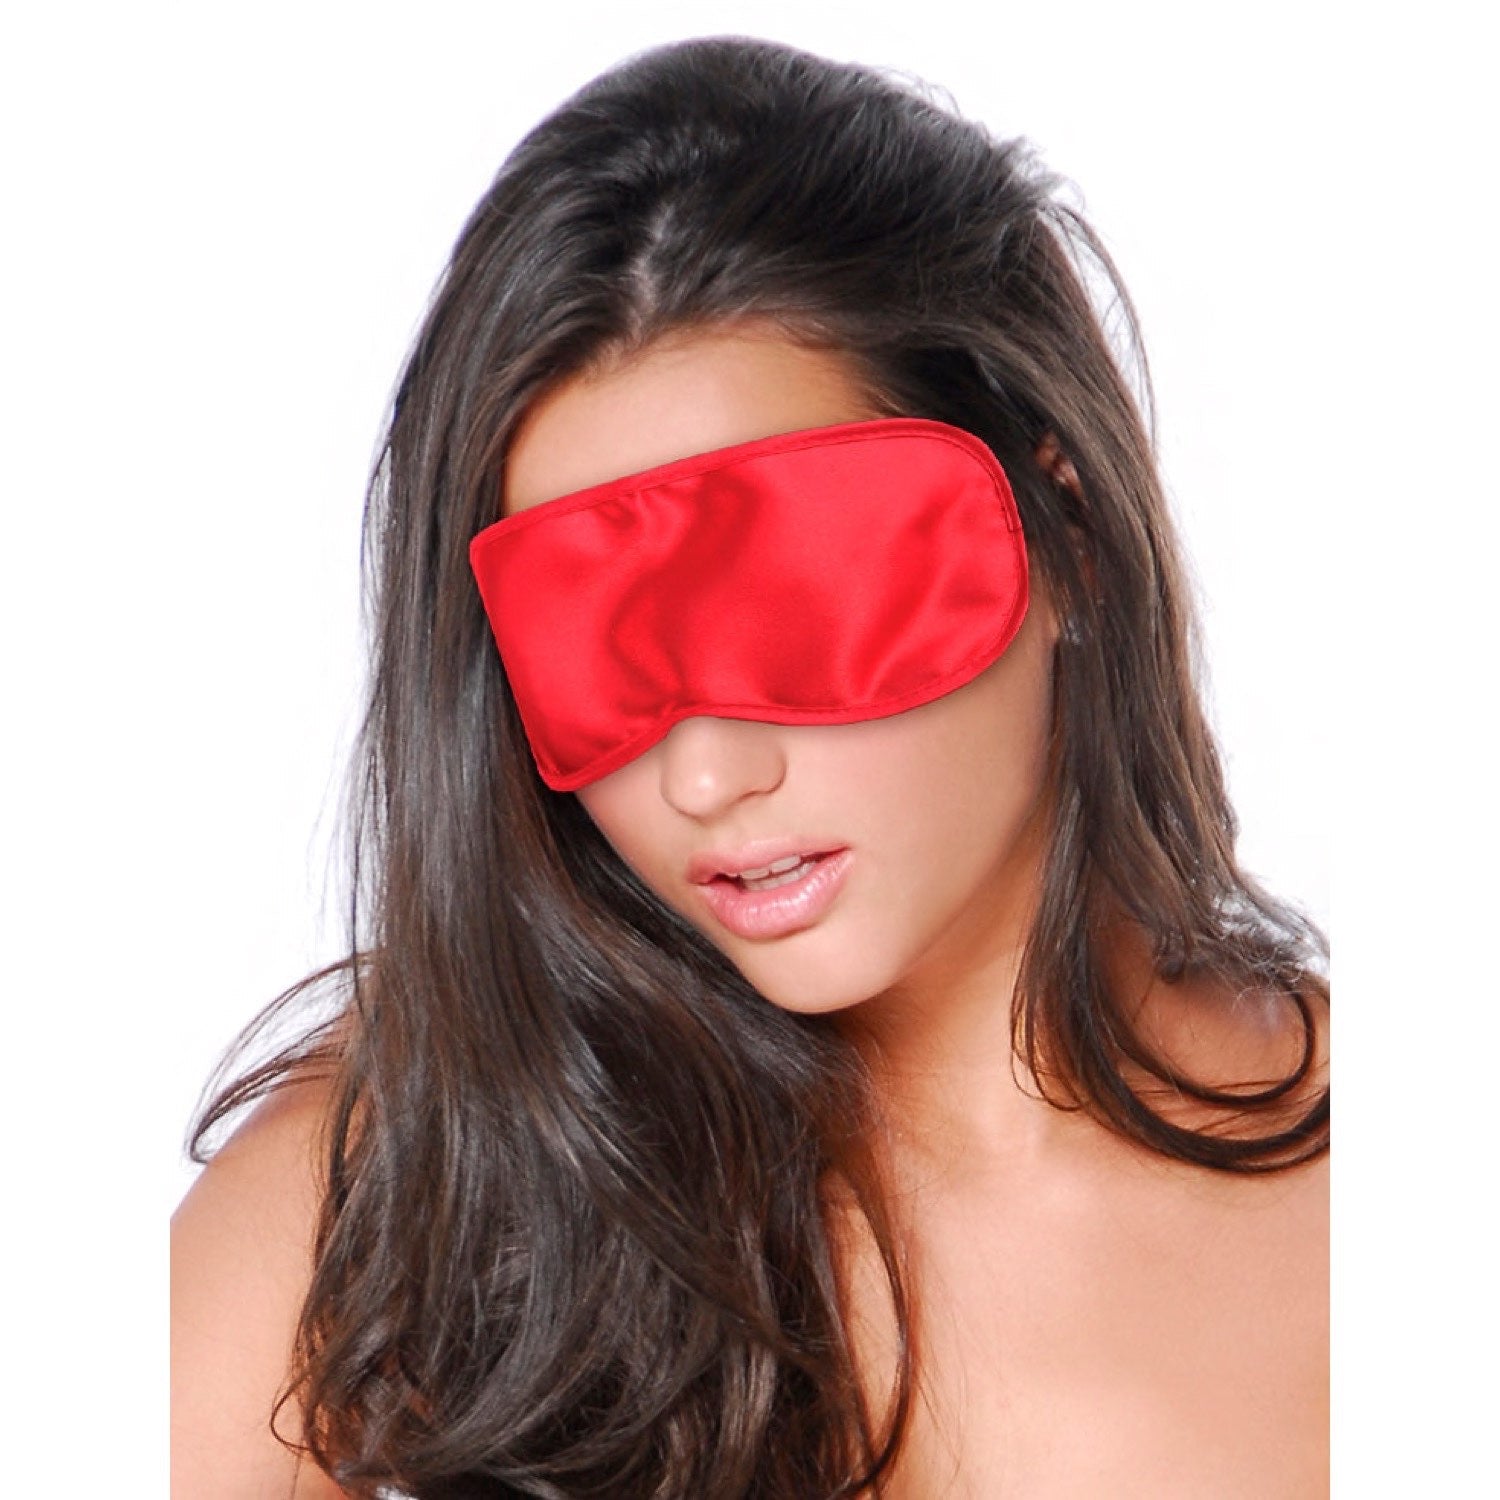 Fetish Fantasy Series Satin Love Mask - Red Eye Mask by Pipedream